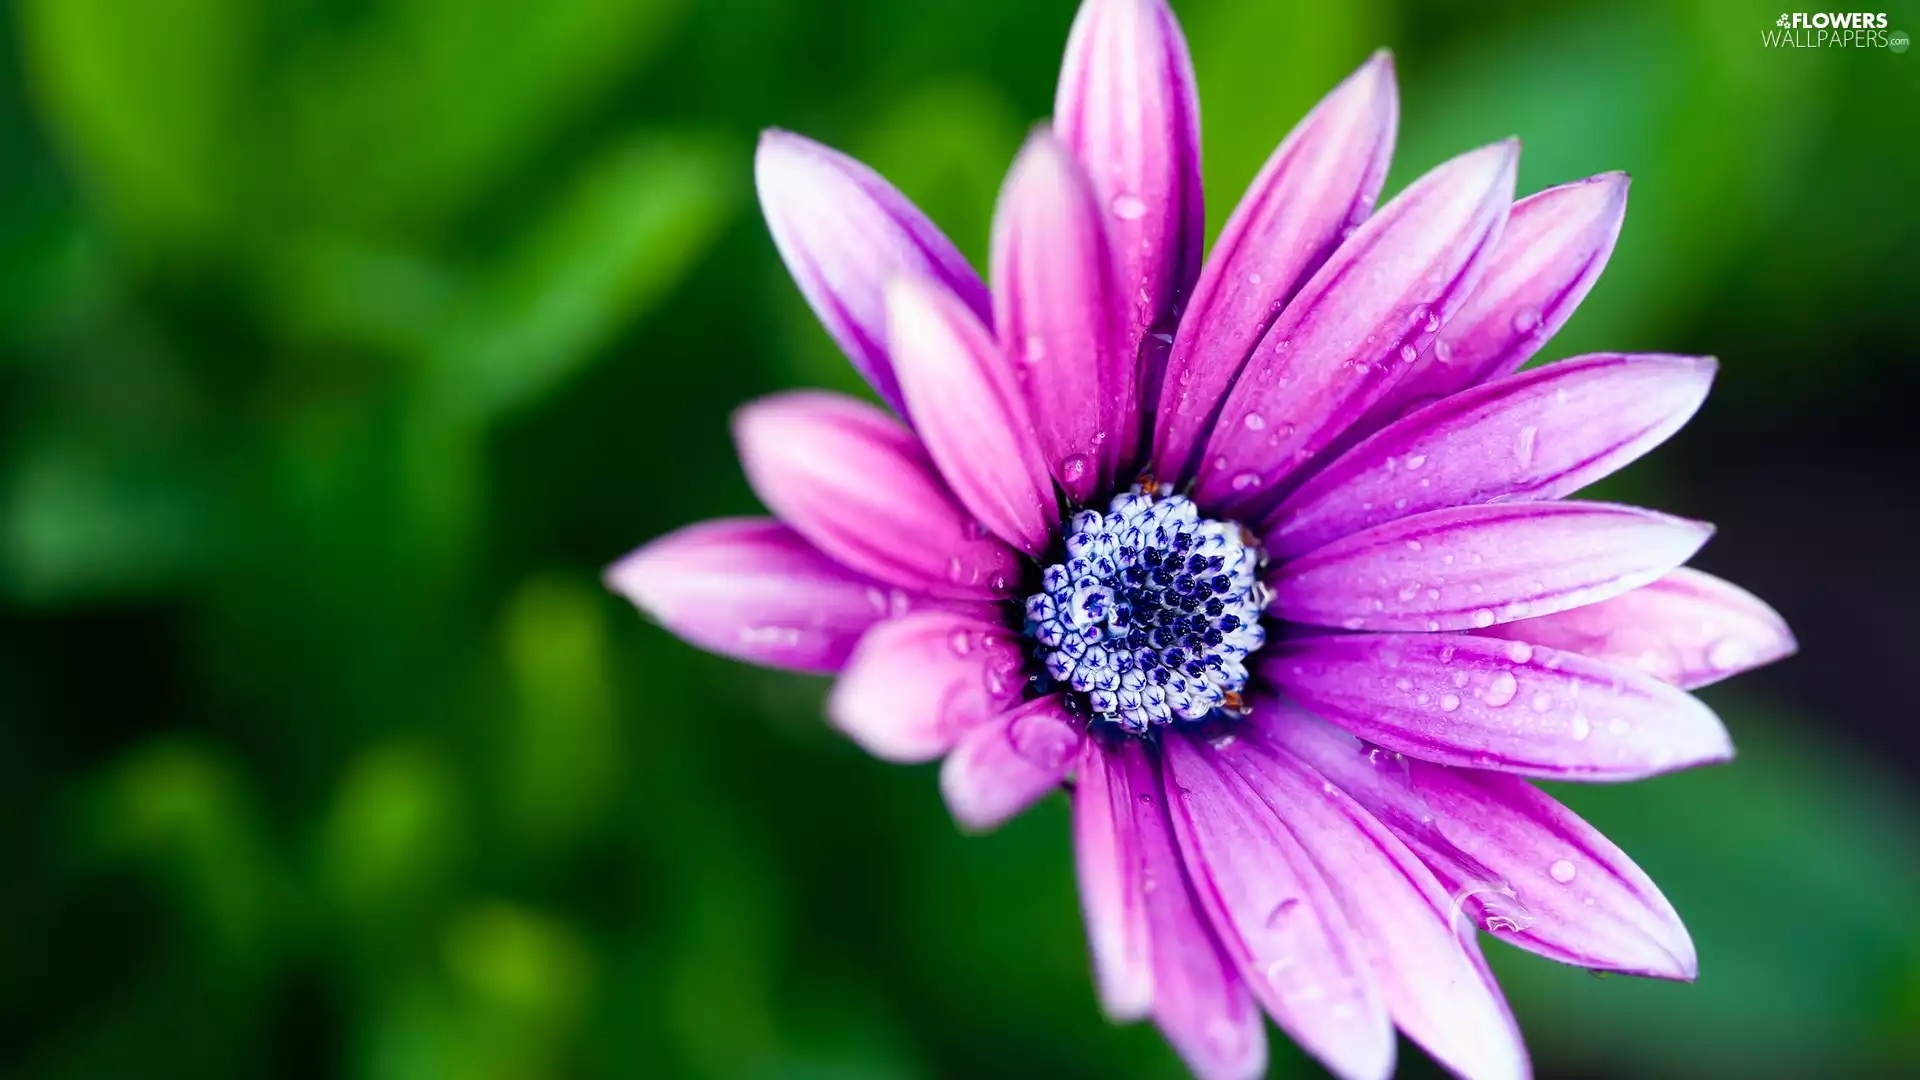 Pink, green ones, background, daisy - Flowers wallpapers ...